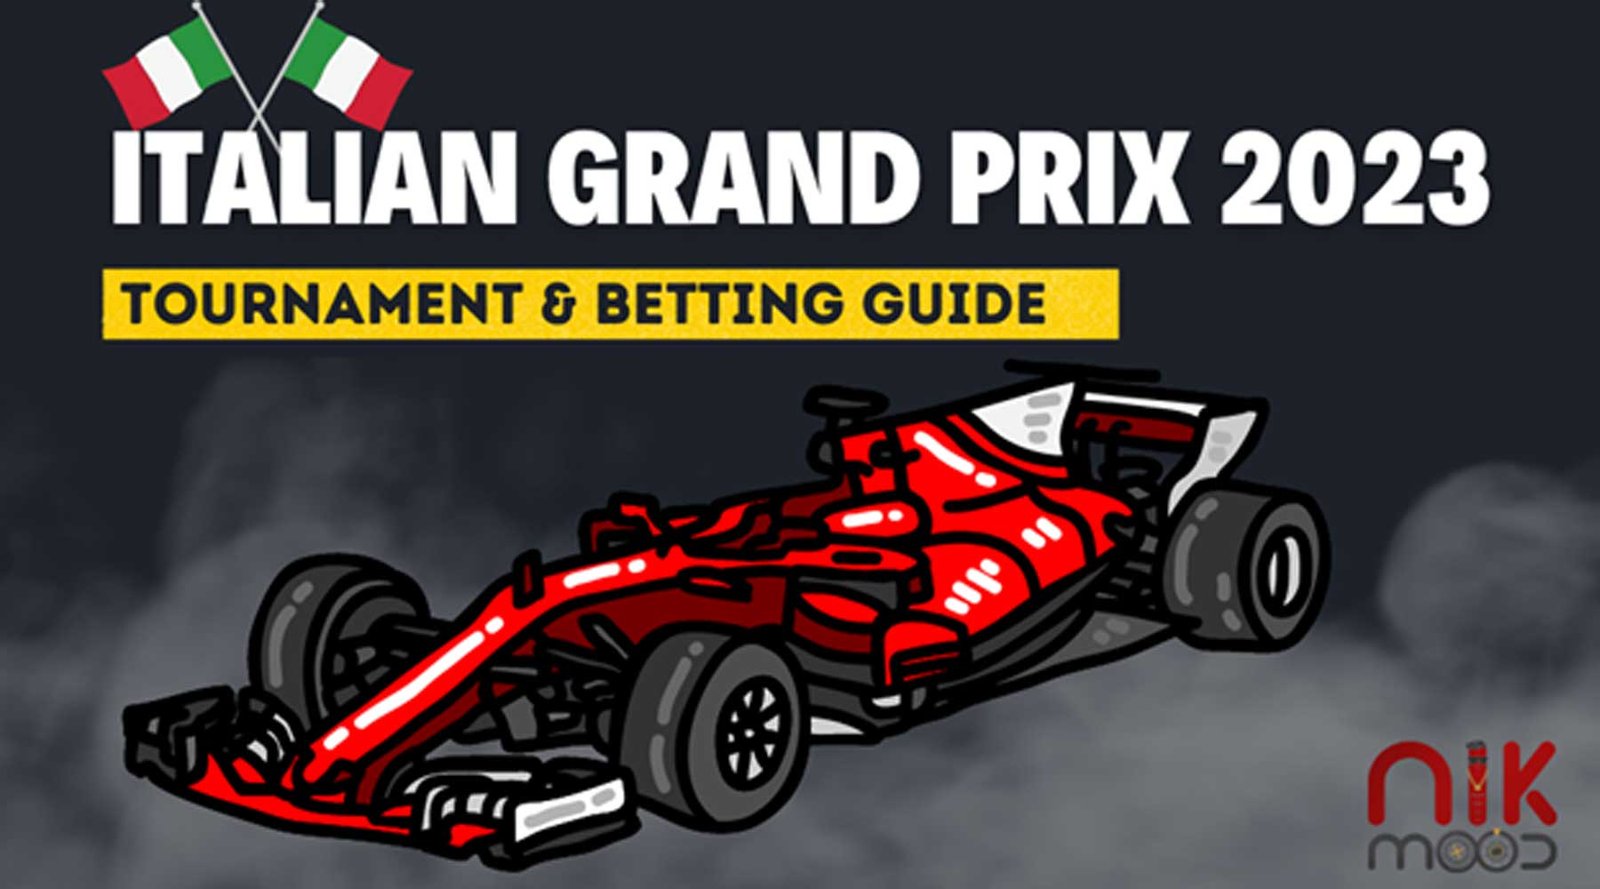 Your 2023 Italian Grand Prix (Monza F1) Guide: Location, Schedule, Odds, and More!